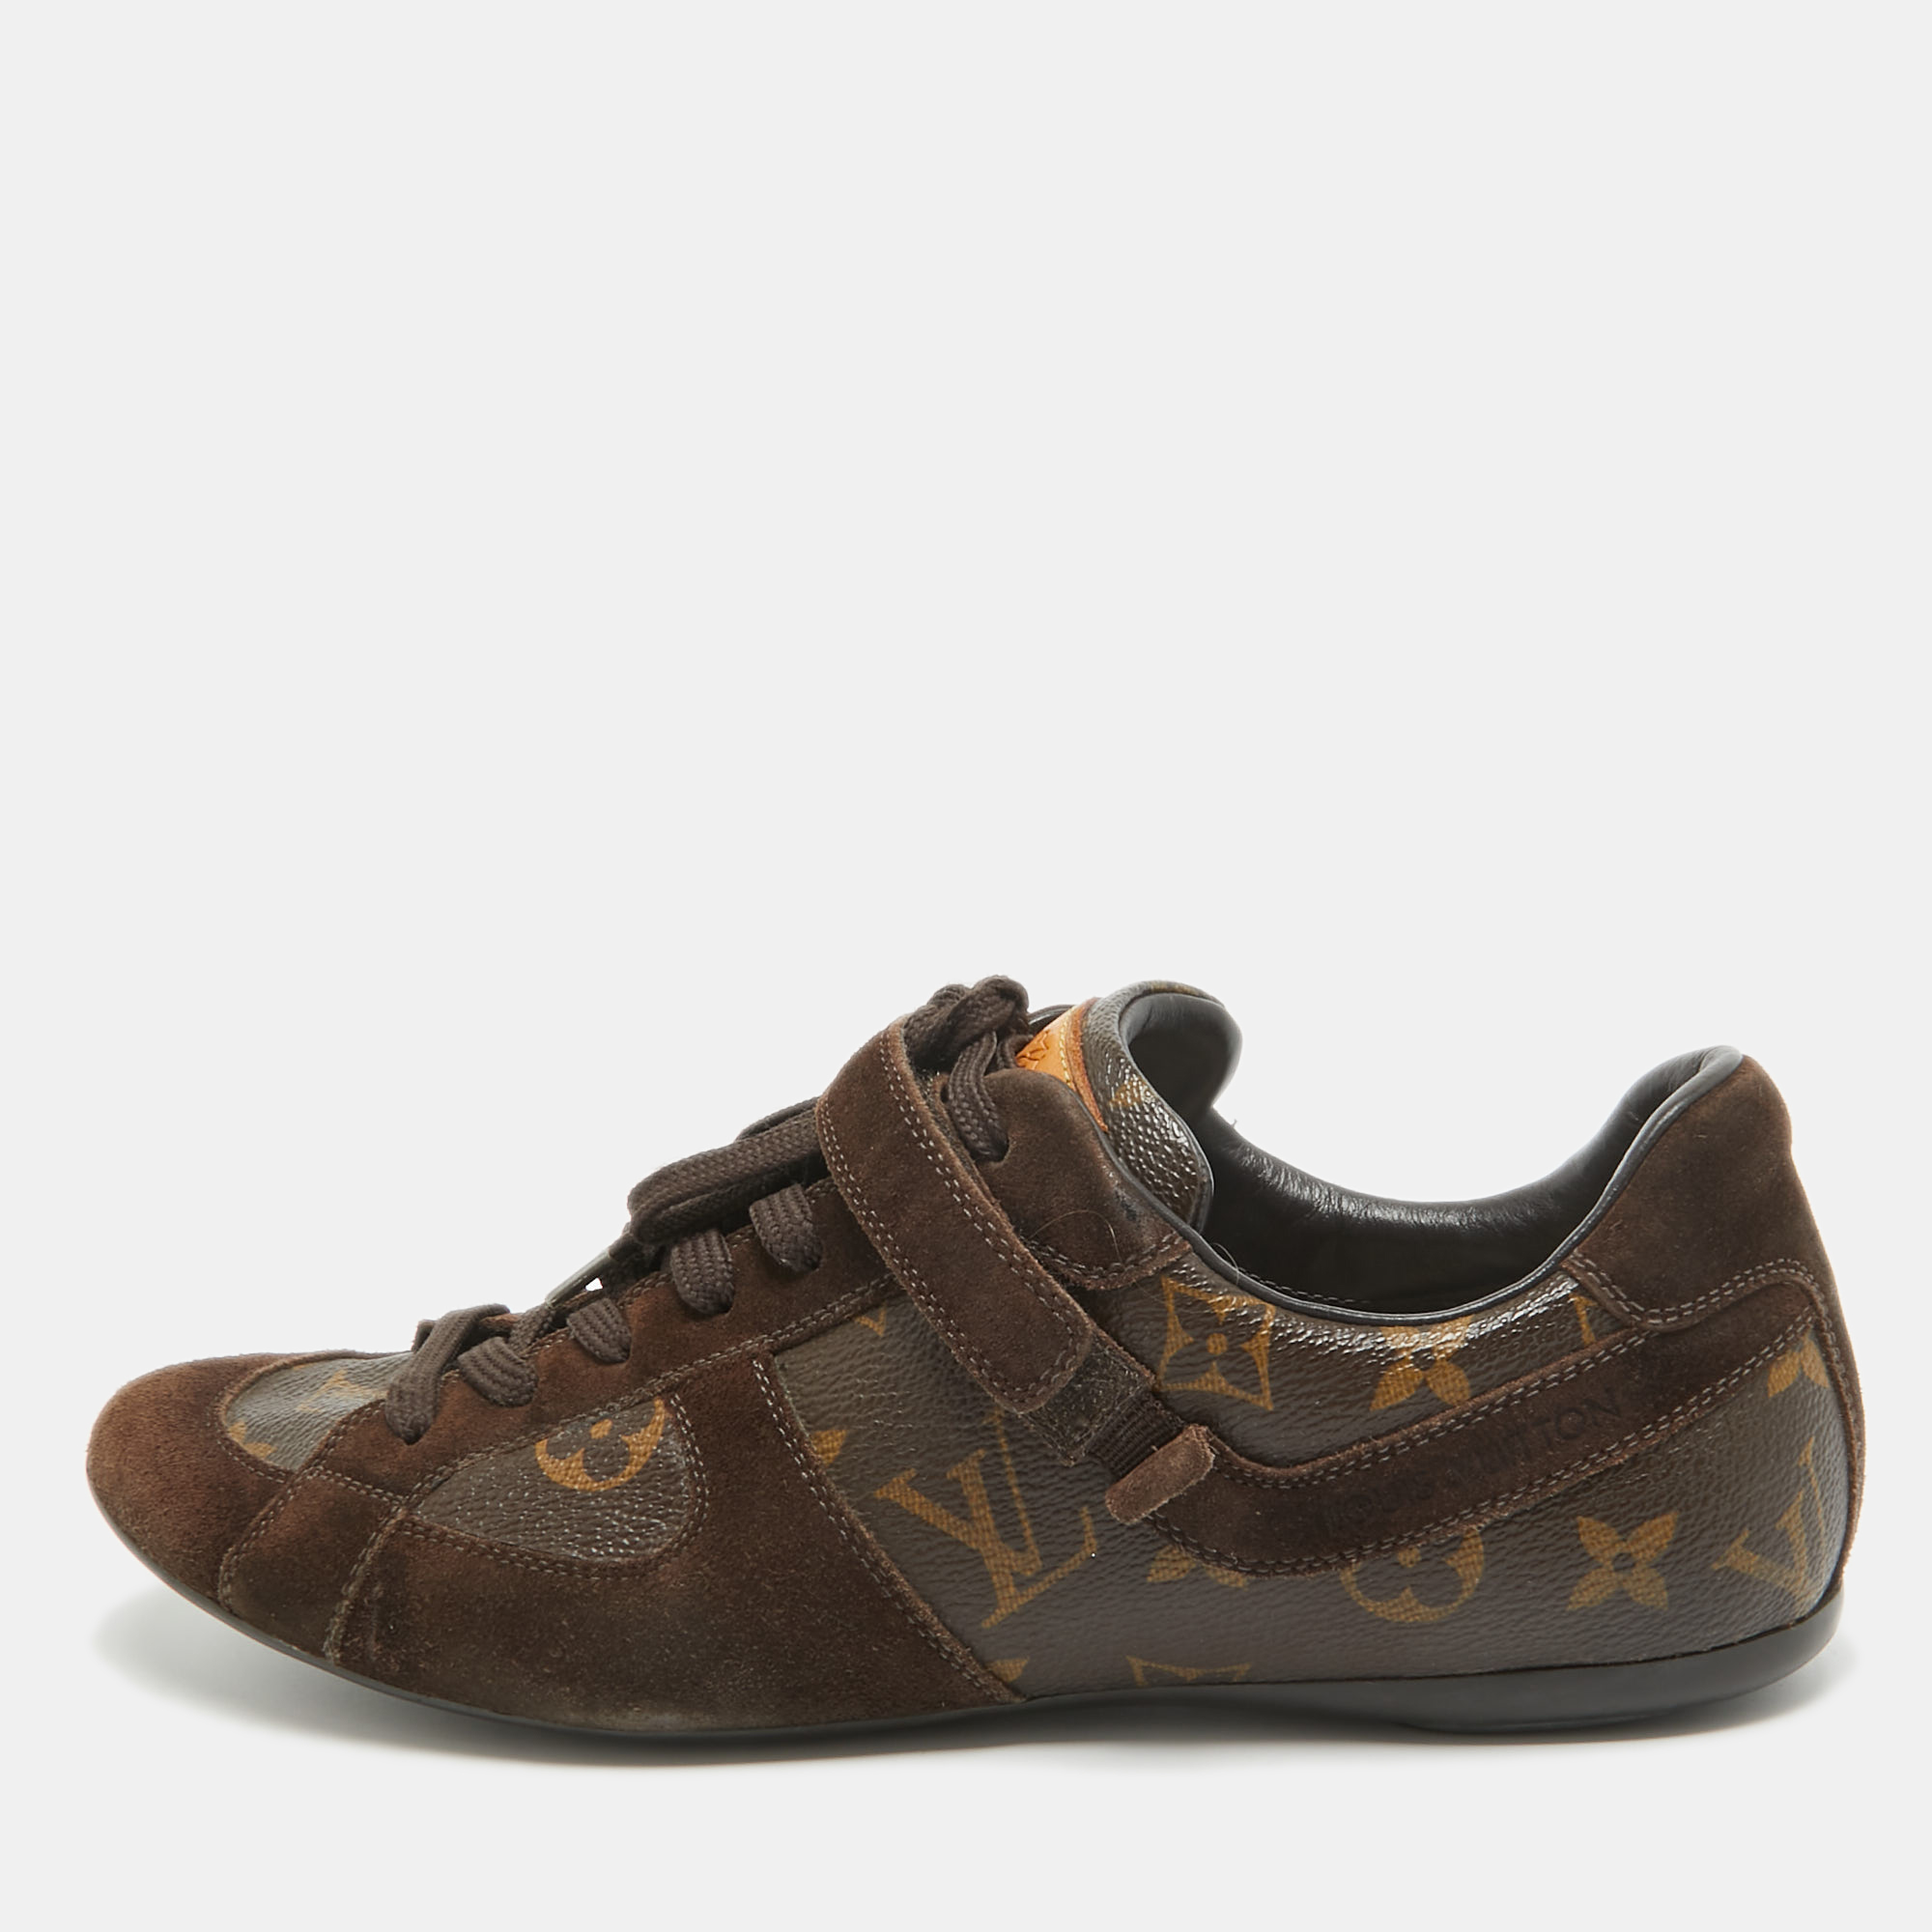 Louis vuitton brown monogram canvas and leather speeding velcro sneakers size 37